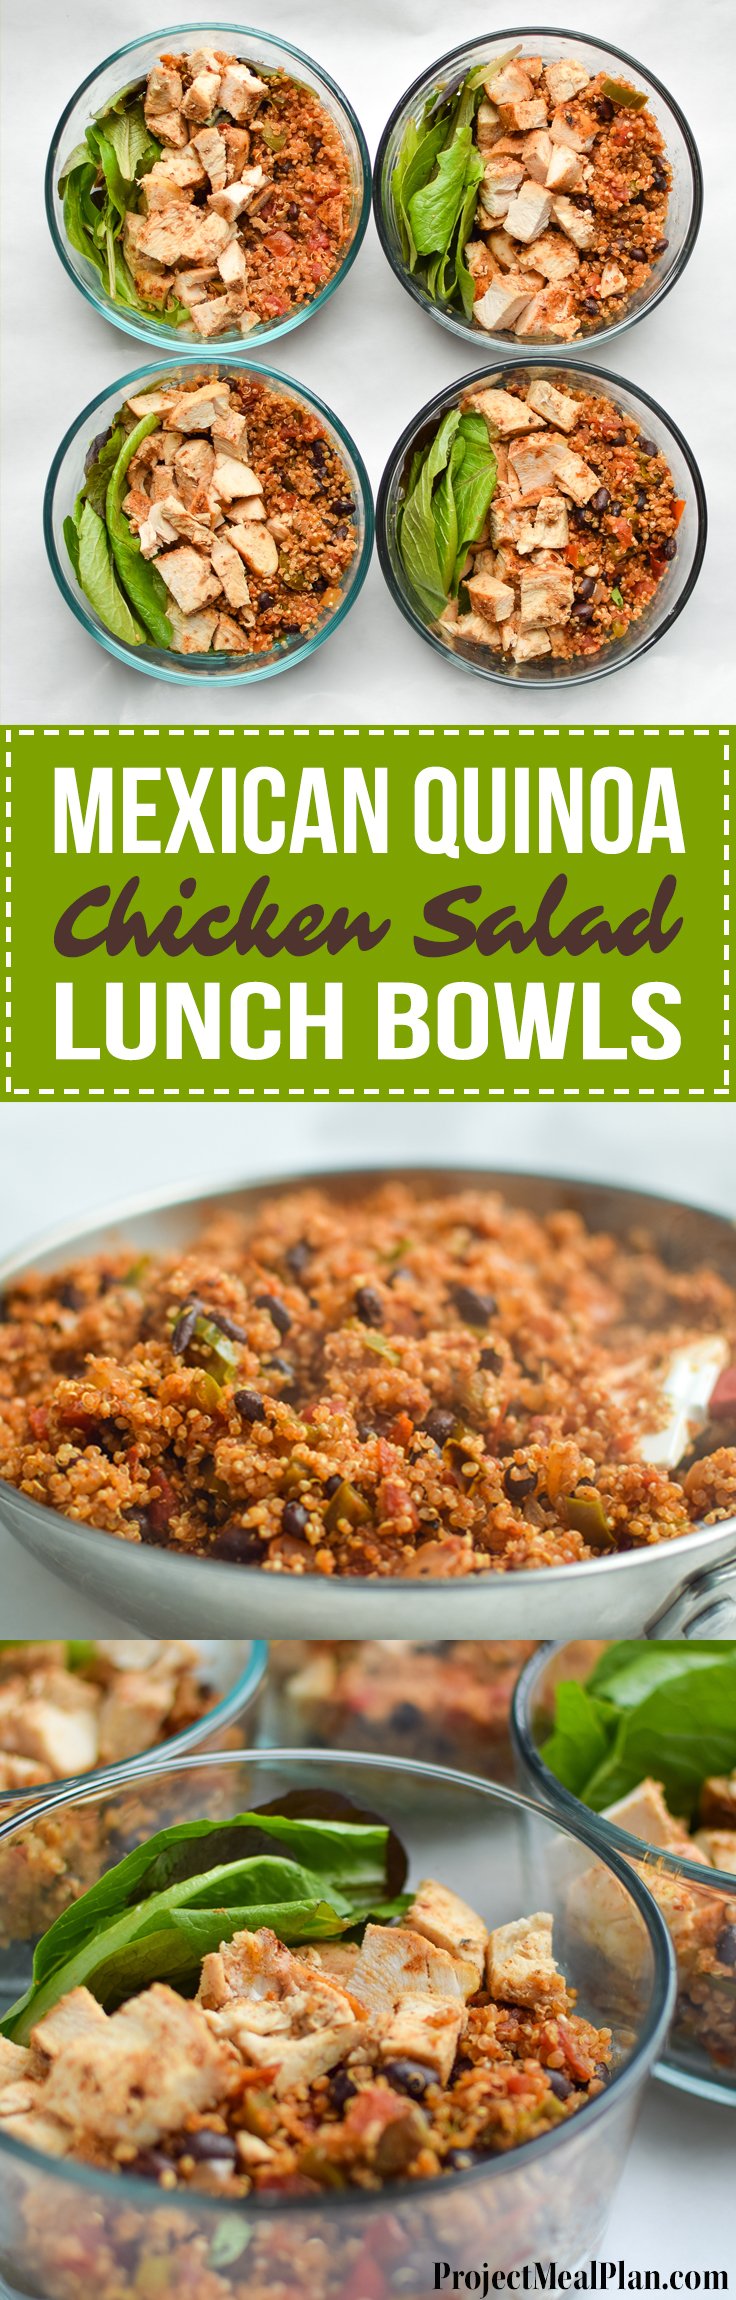 Mexican Quinoa Chicken Salad Lunch Bowls - My meal prep this week consisting of mexi quinoa and baked chicken breast over greens! - ProjectMealPlan.com